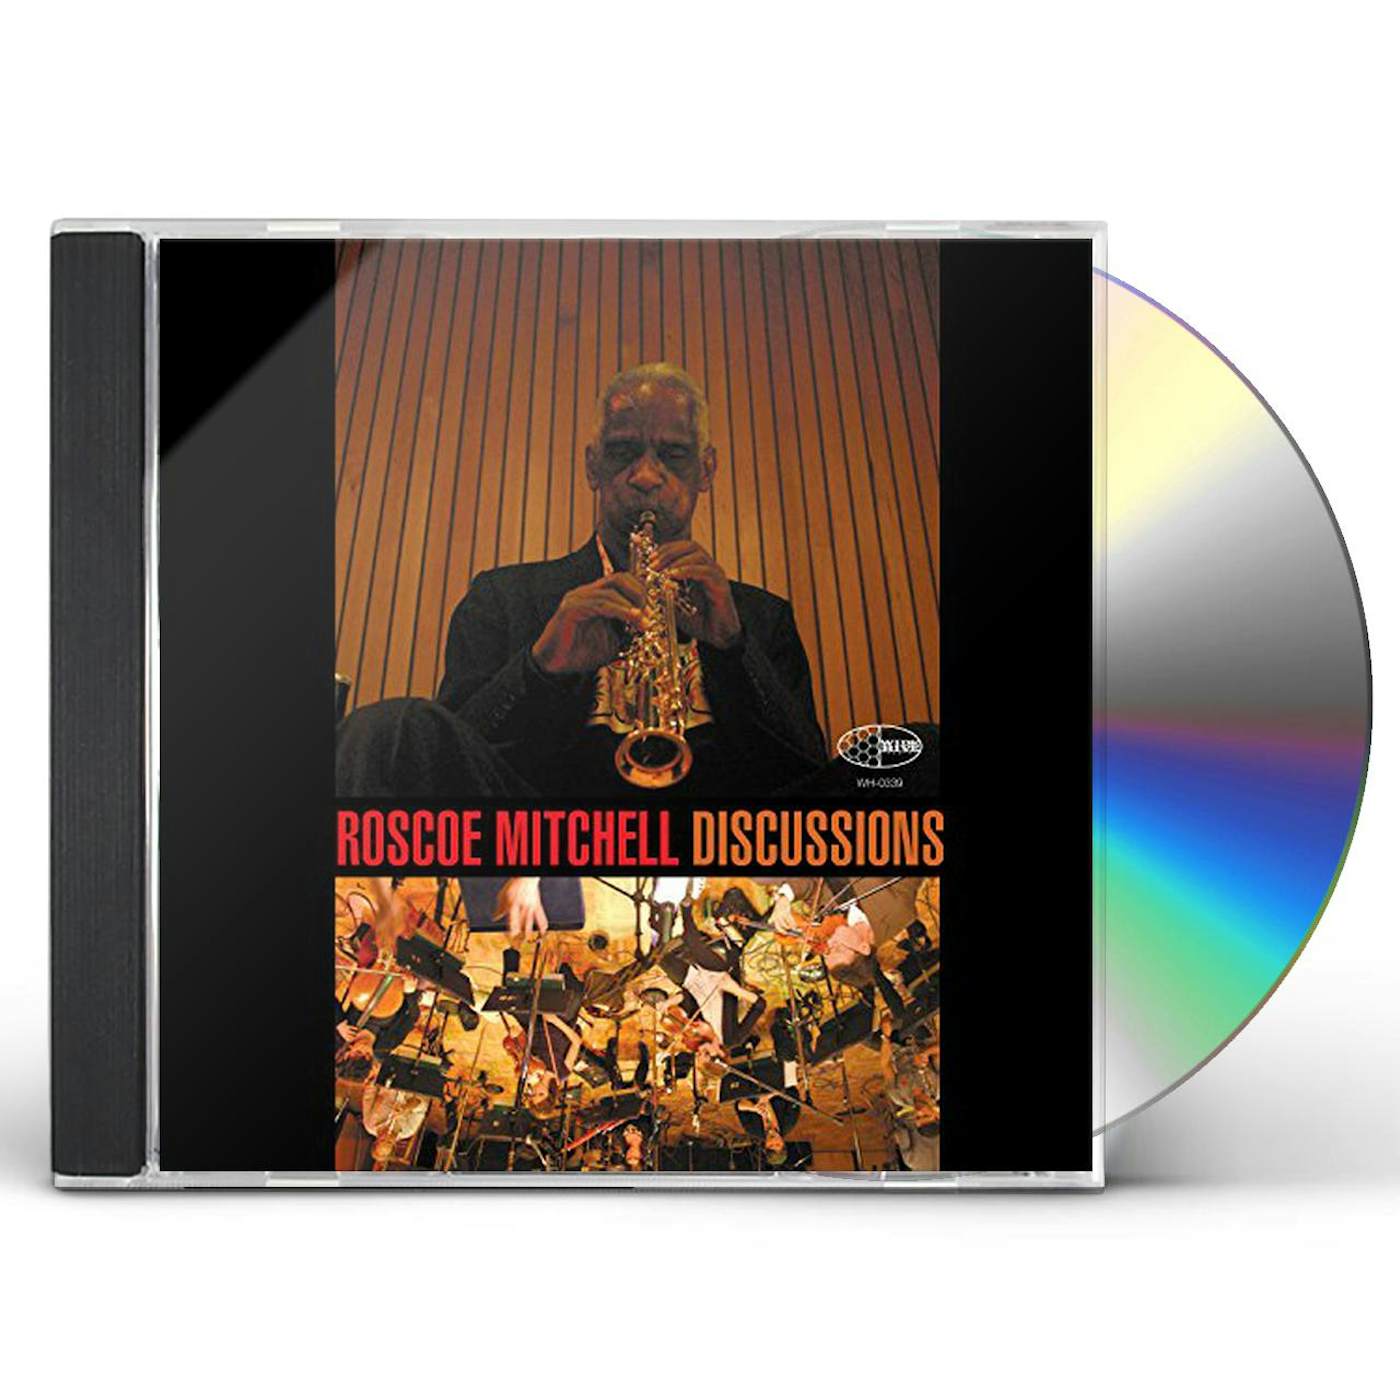 Roscoe Mitchell DISCUSSIONS ORCHESTRA CD